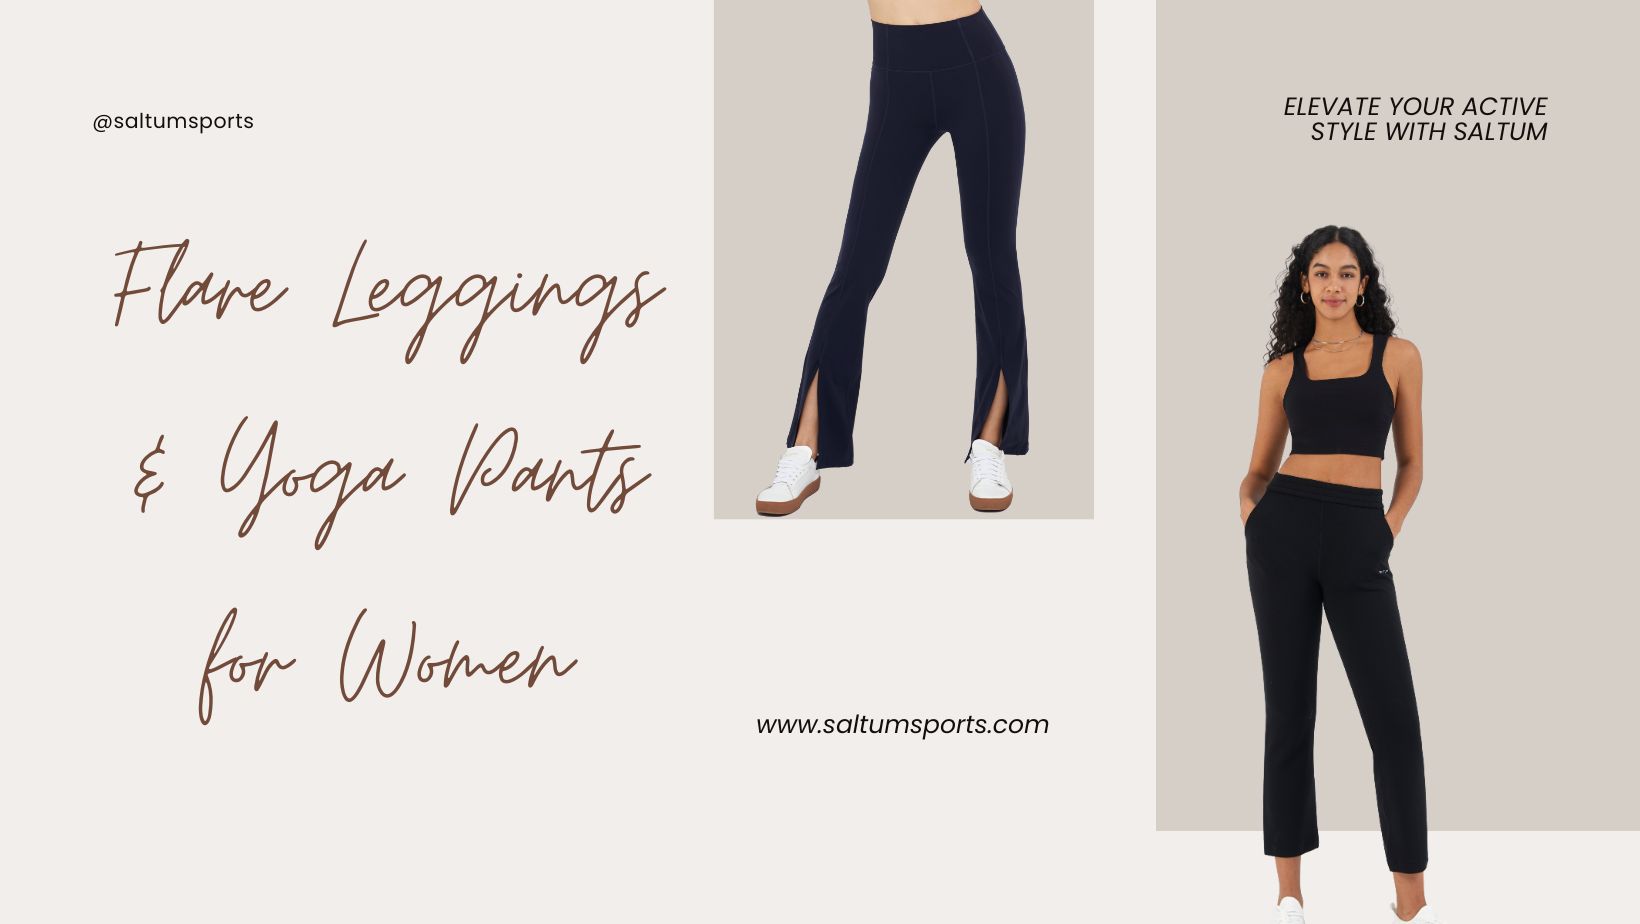 Flare Leggings & Yoga Pants for Women: Elevate Your Active Style with Saltum